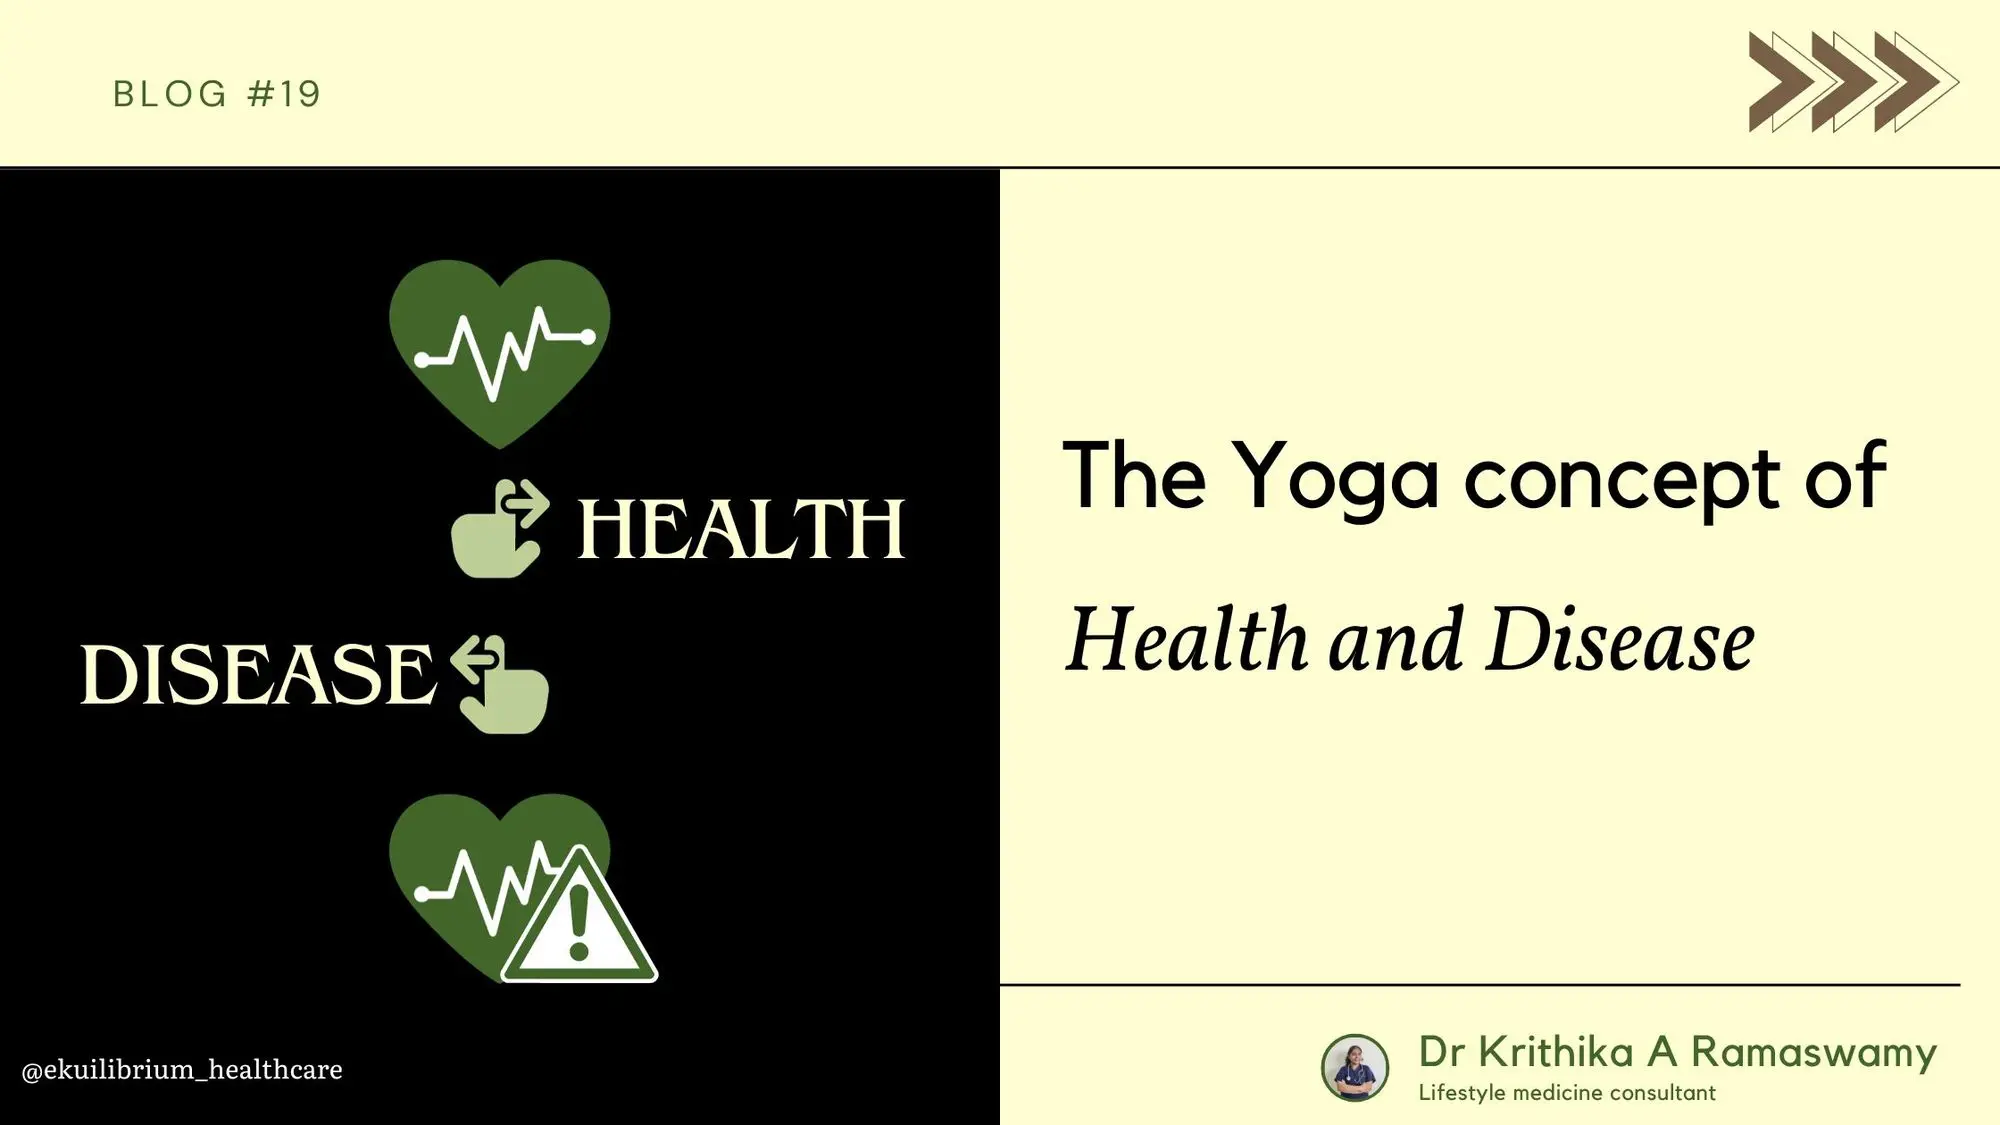 concept of health and disease in yoga - What are the reasons of diseases and disorders according to yogic view